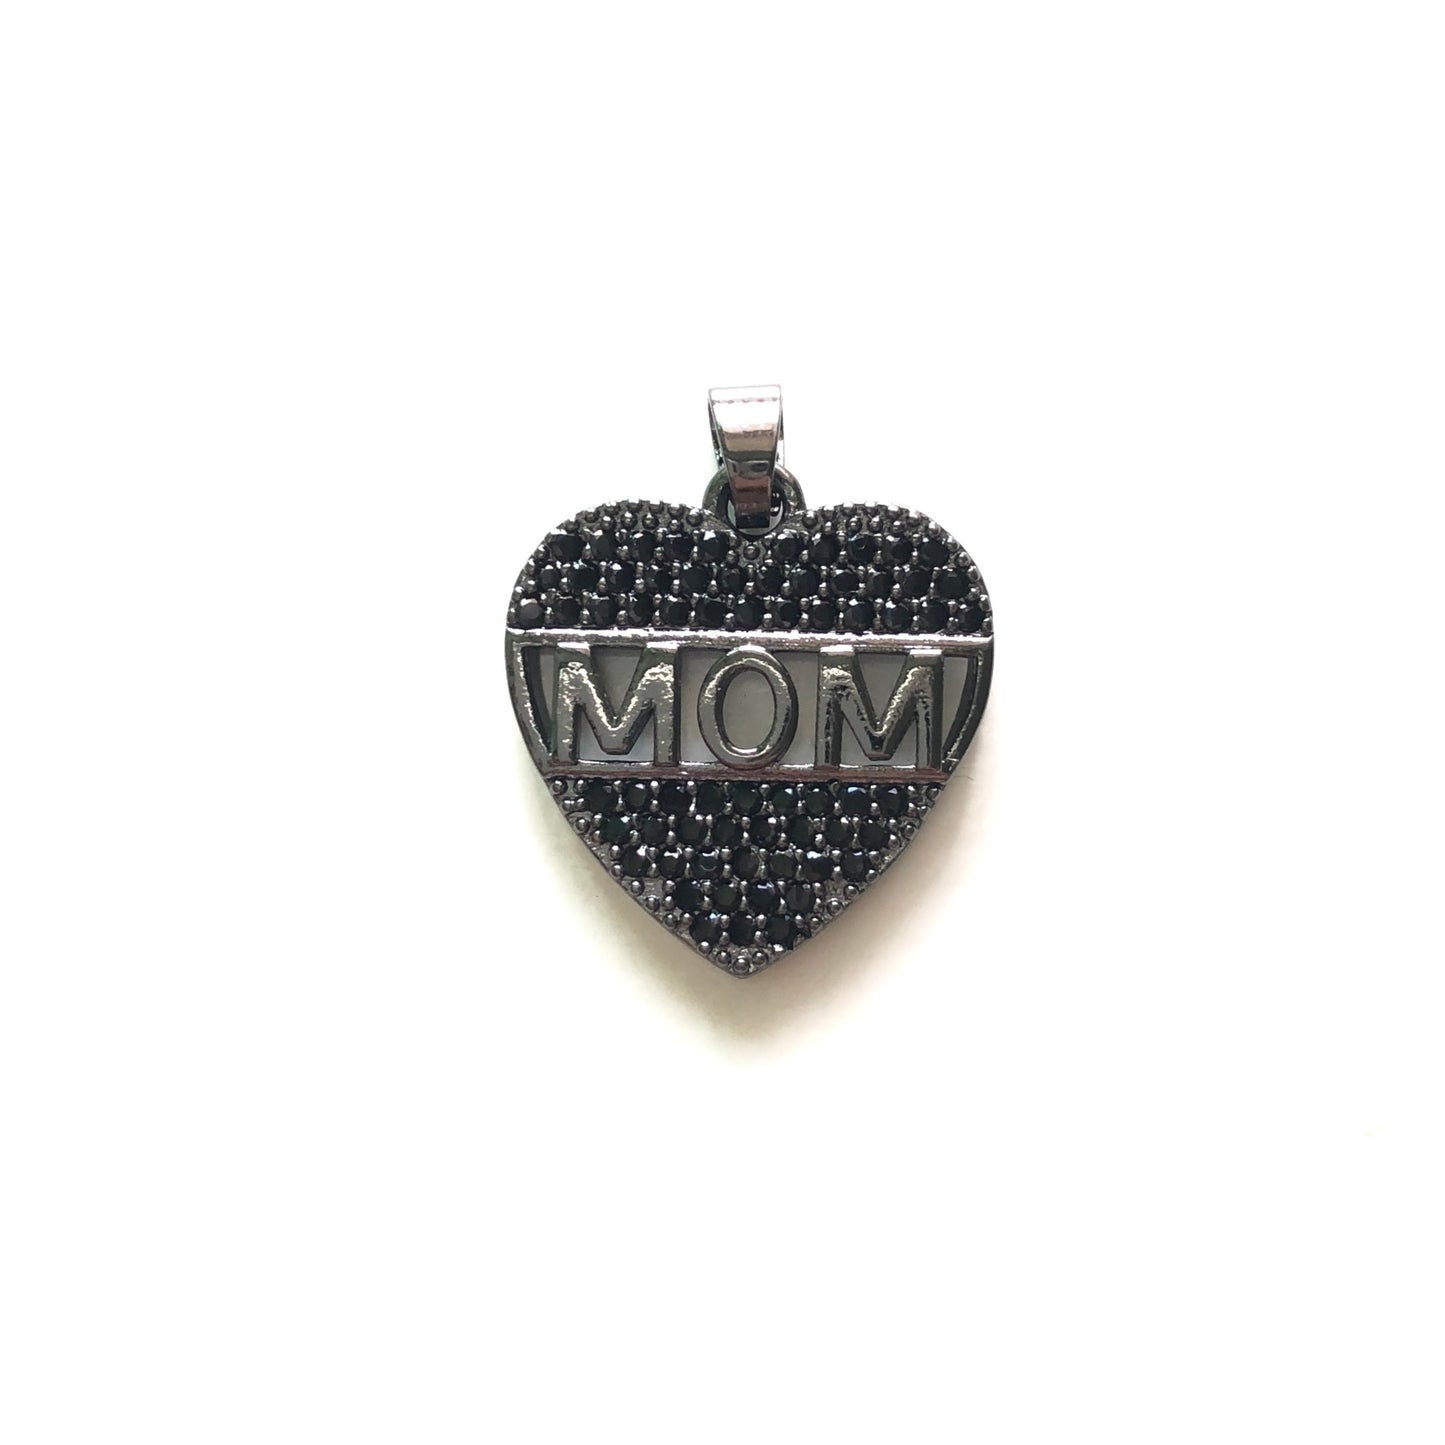 10pcs/lot 18*17mm CZ Paved Mom Charms for Mother's Day Black on Black CZ Paved Charms Hearts Mother's Day Charms Beads Beyond